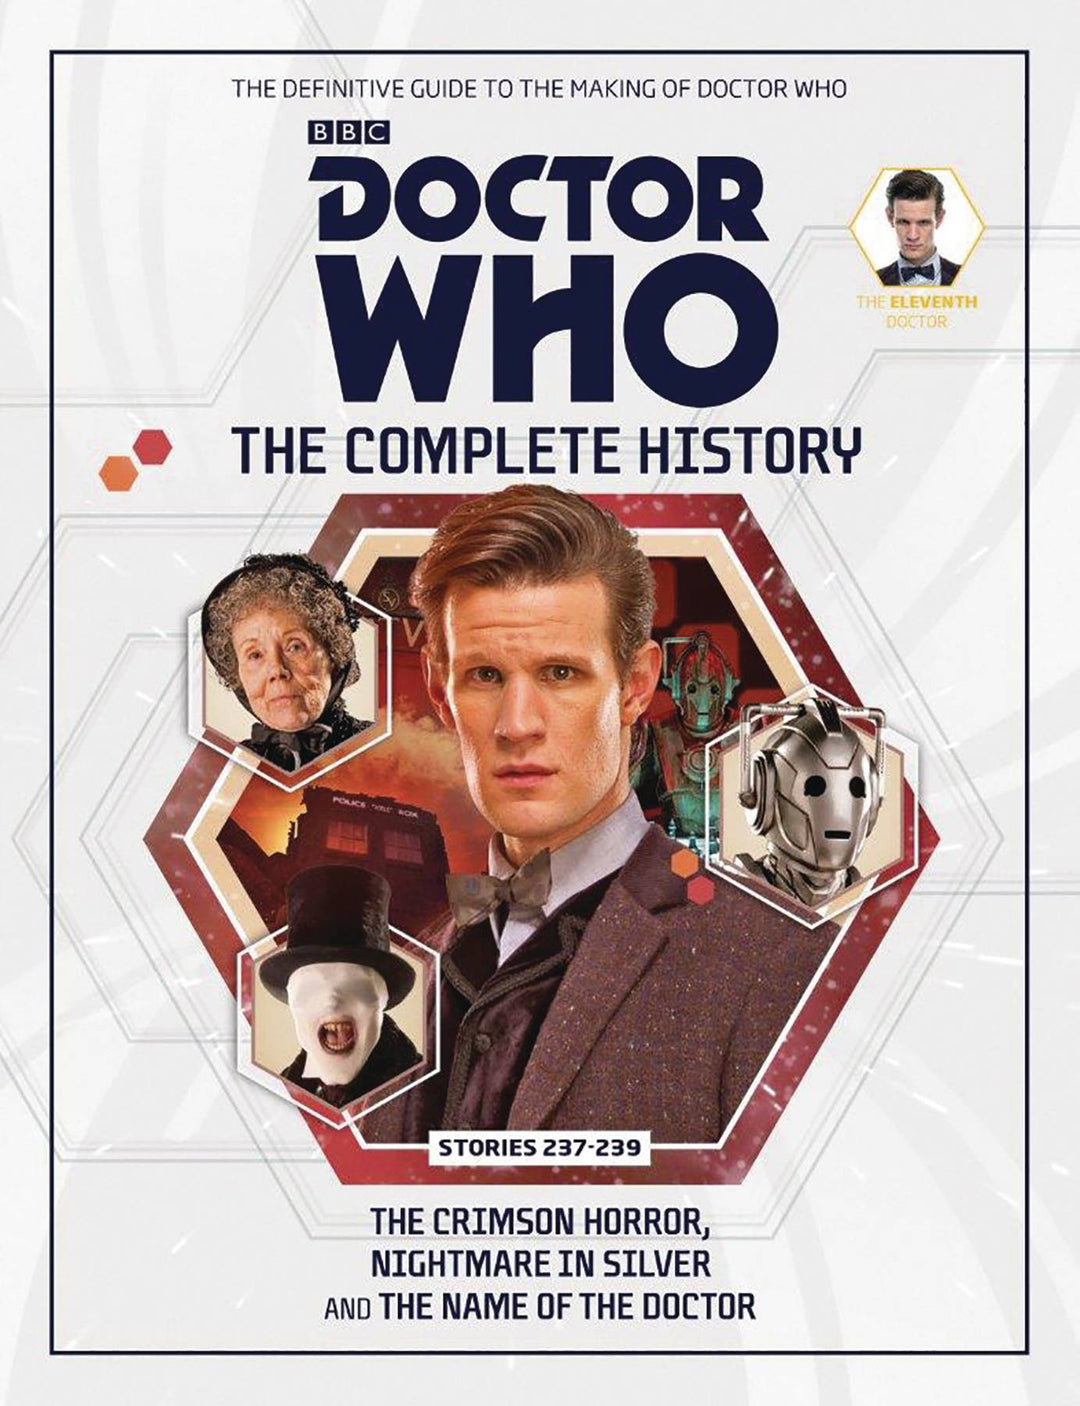 Doctor Who Comp Hist Hardcover Volume 71 11th Doctor Stories 237-239 (